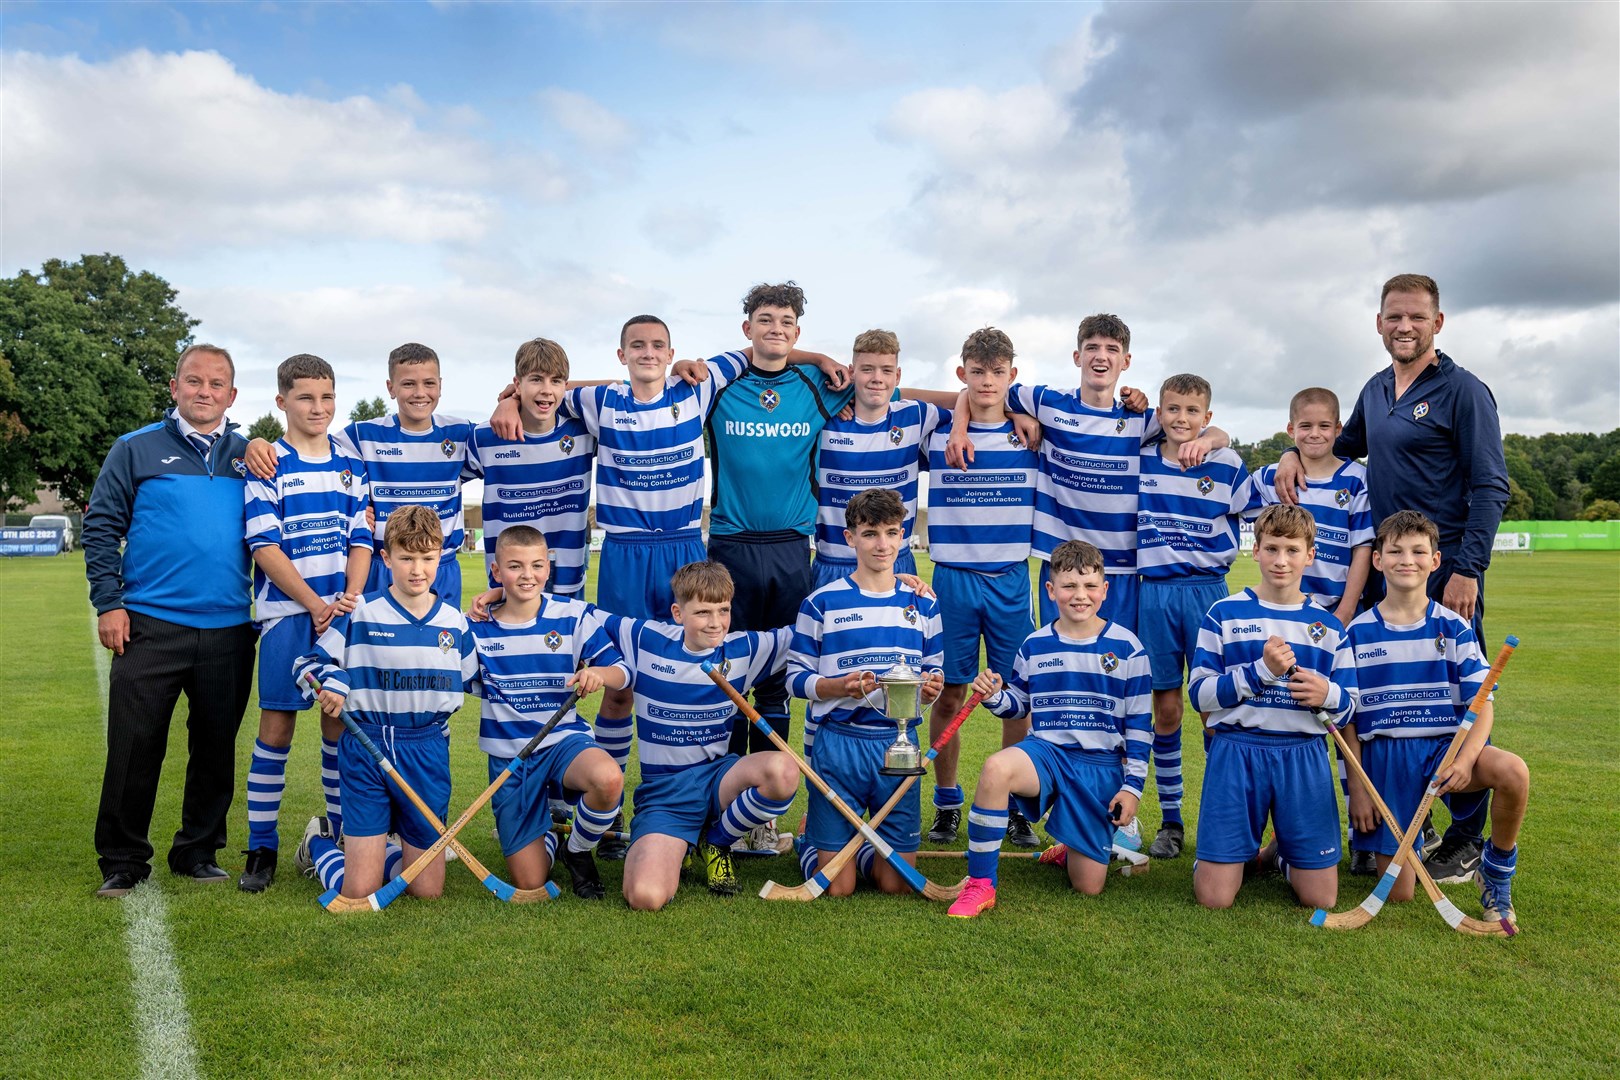 The history-making Newtonmore under U14 team who lifted the prestigious MacMaster Cup for the first time in the club’s history after beating Skye at The Bught in Inverness.